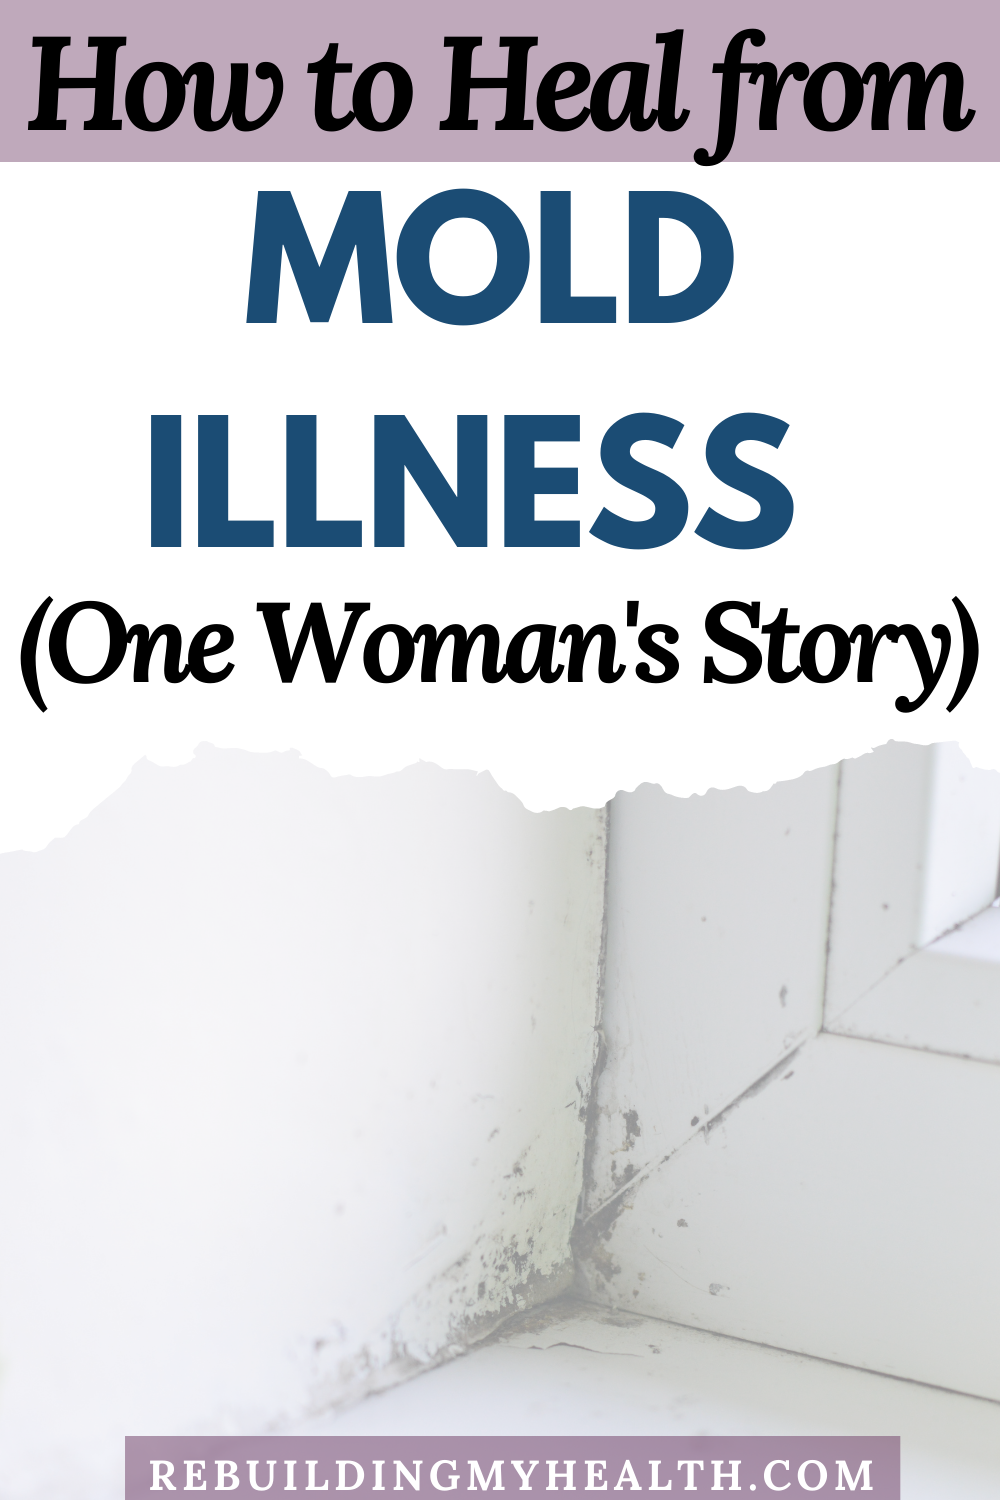 After Brandy suddenly became ill - dizzy, fatigued and rapidly gaining weight - she eventually found the cause: mold toxicity. With detox, diet and more, she got her life back.